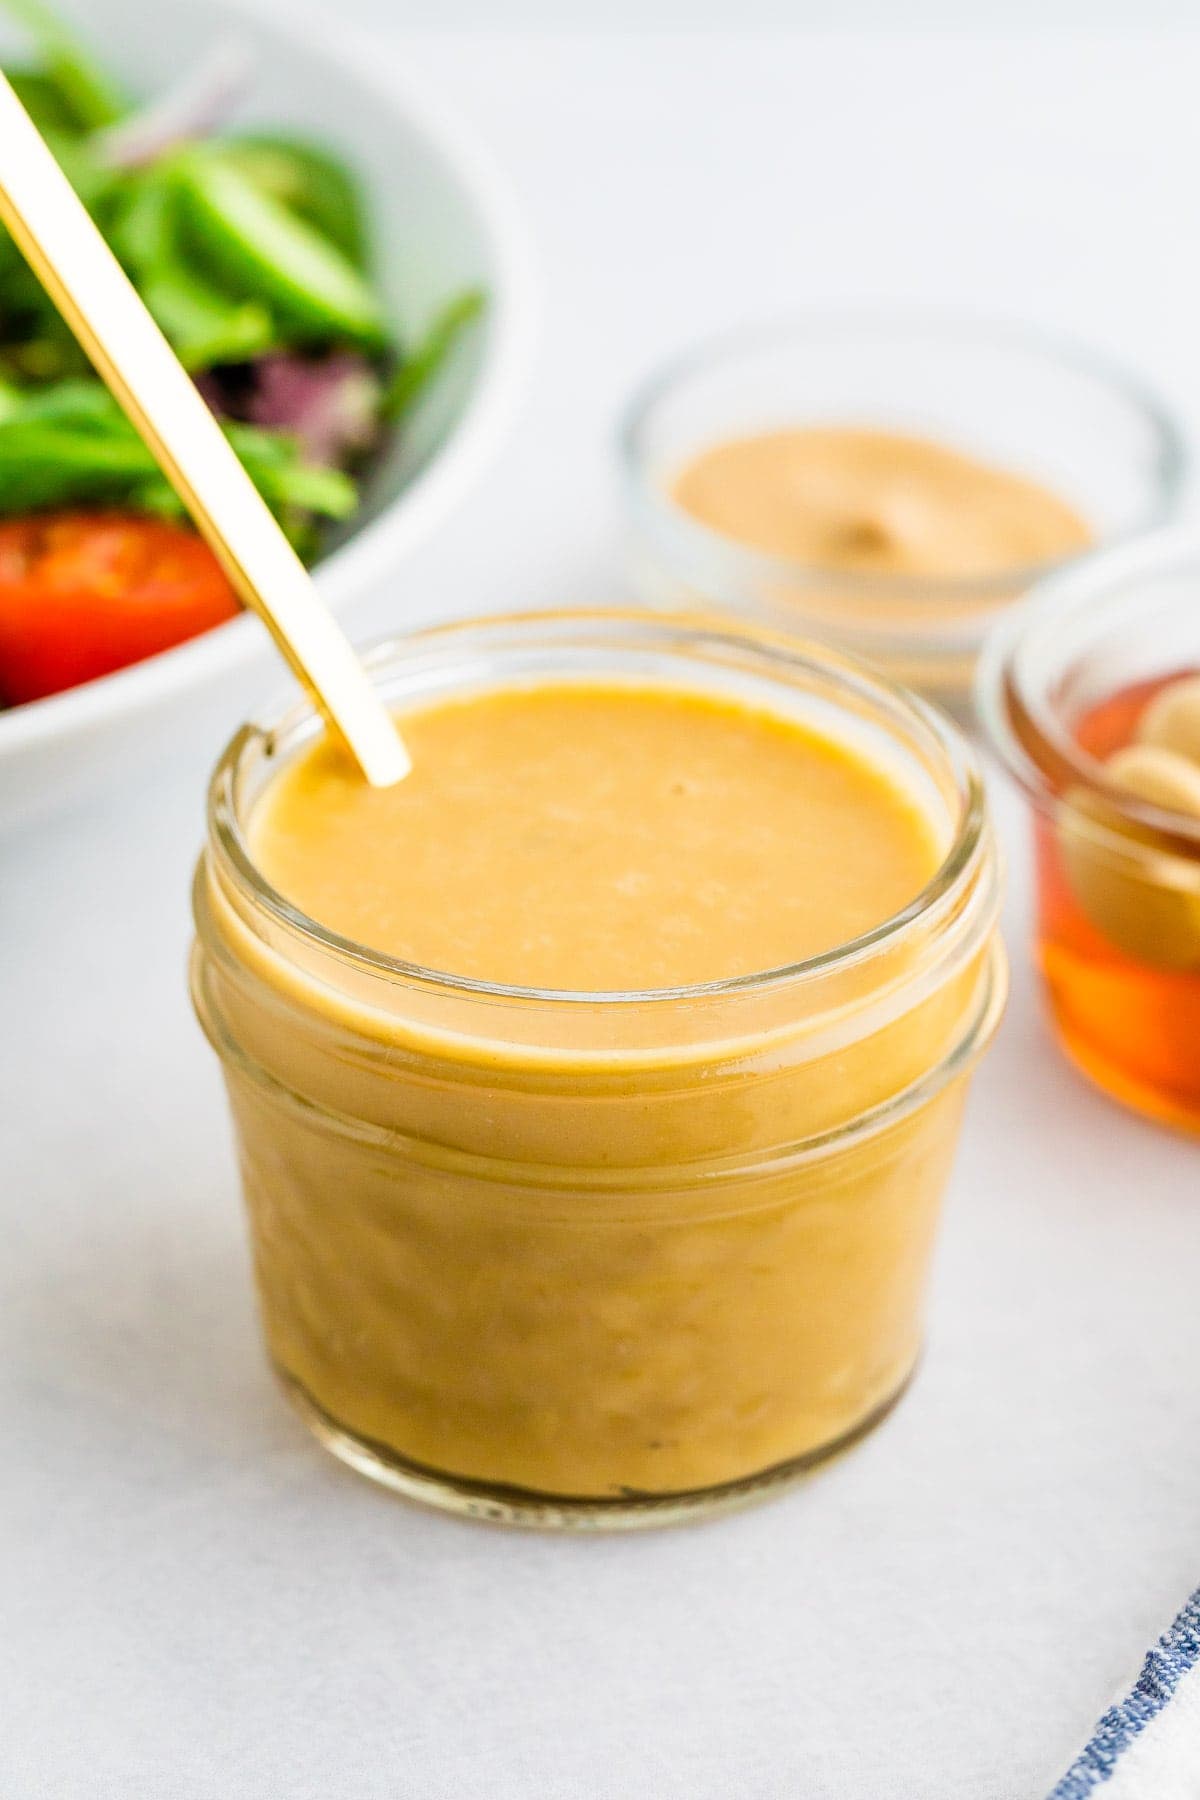 Jar and spoon with honey mustard dressing. A salad is behind the jar of dressing.